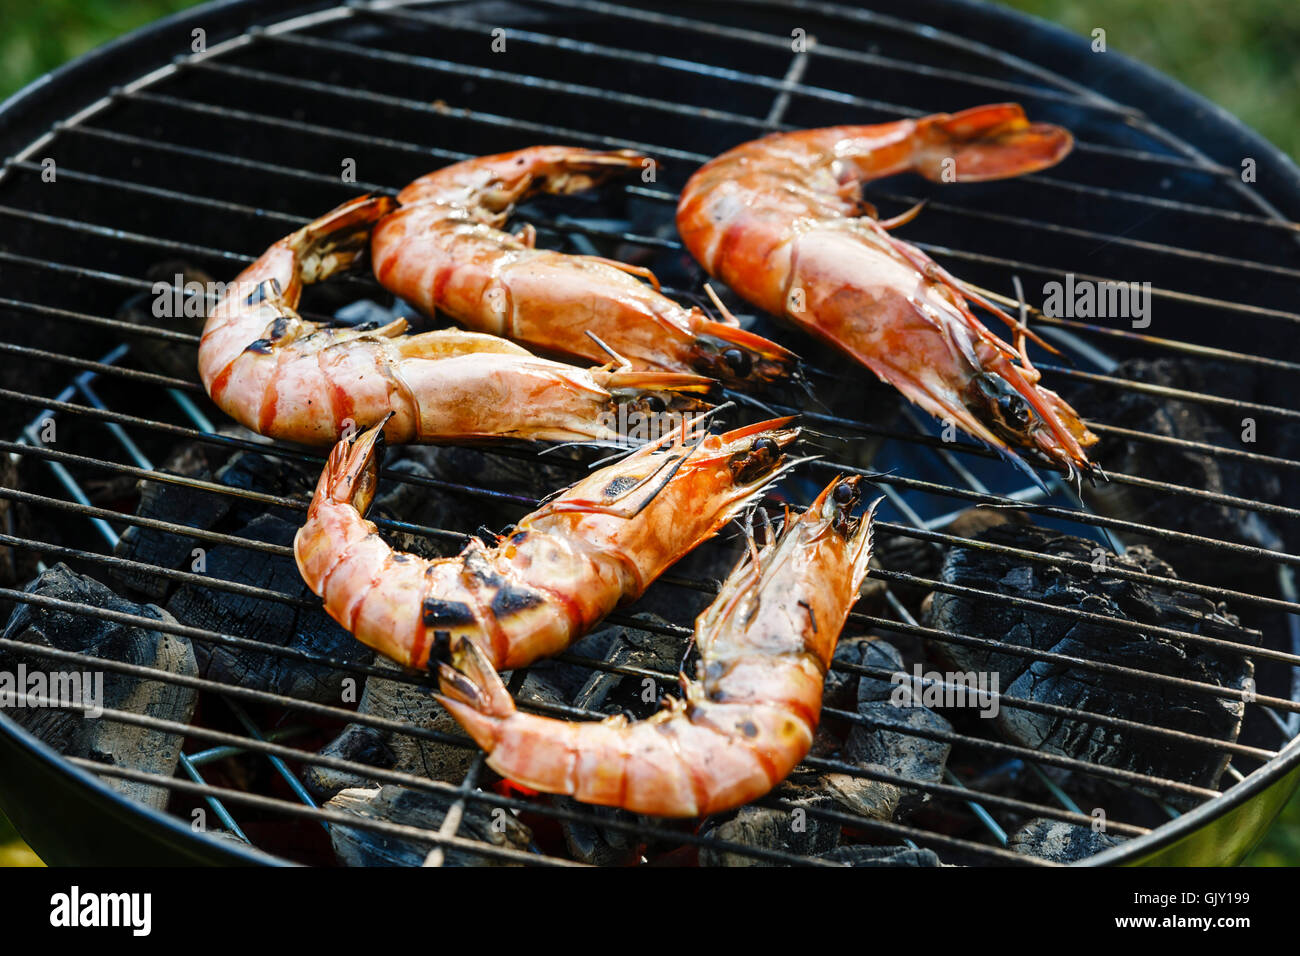 Grilled king size Prawns on grill BBQ background Stock Photo